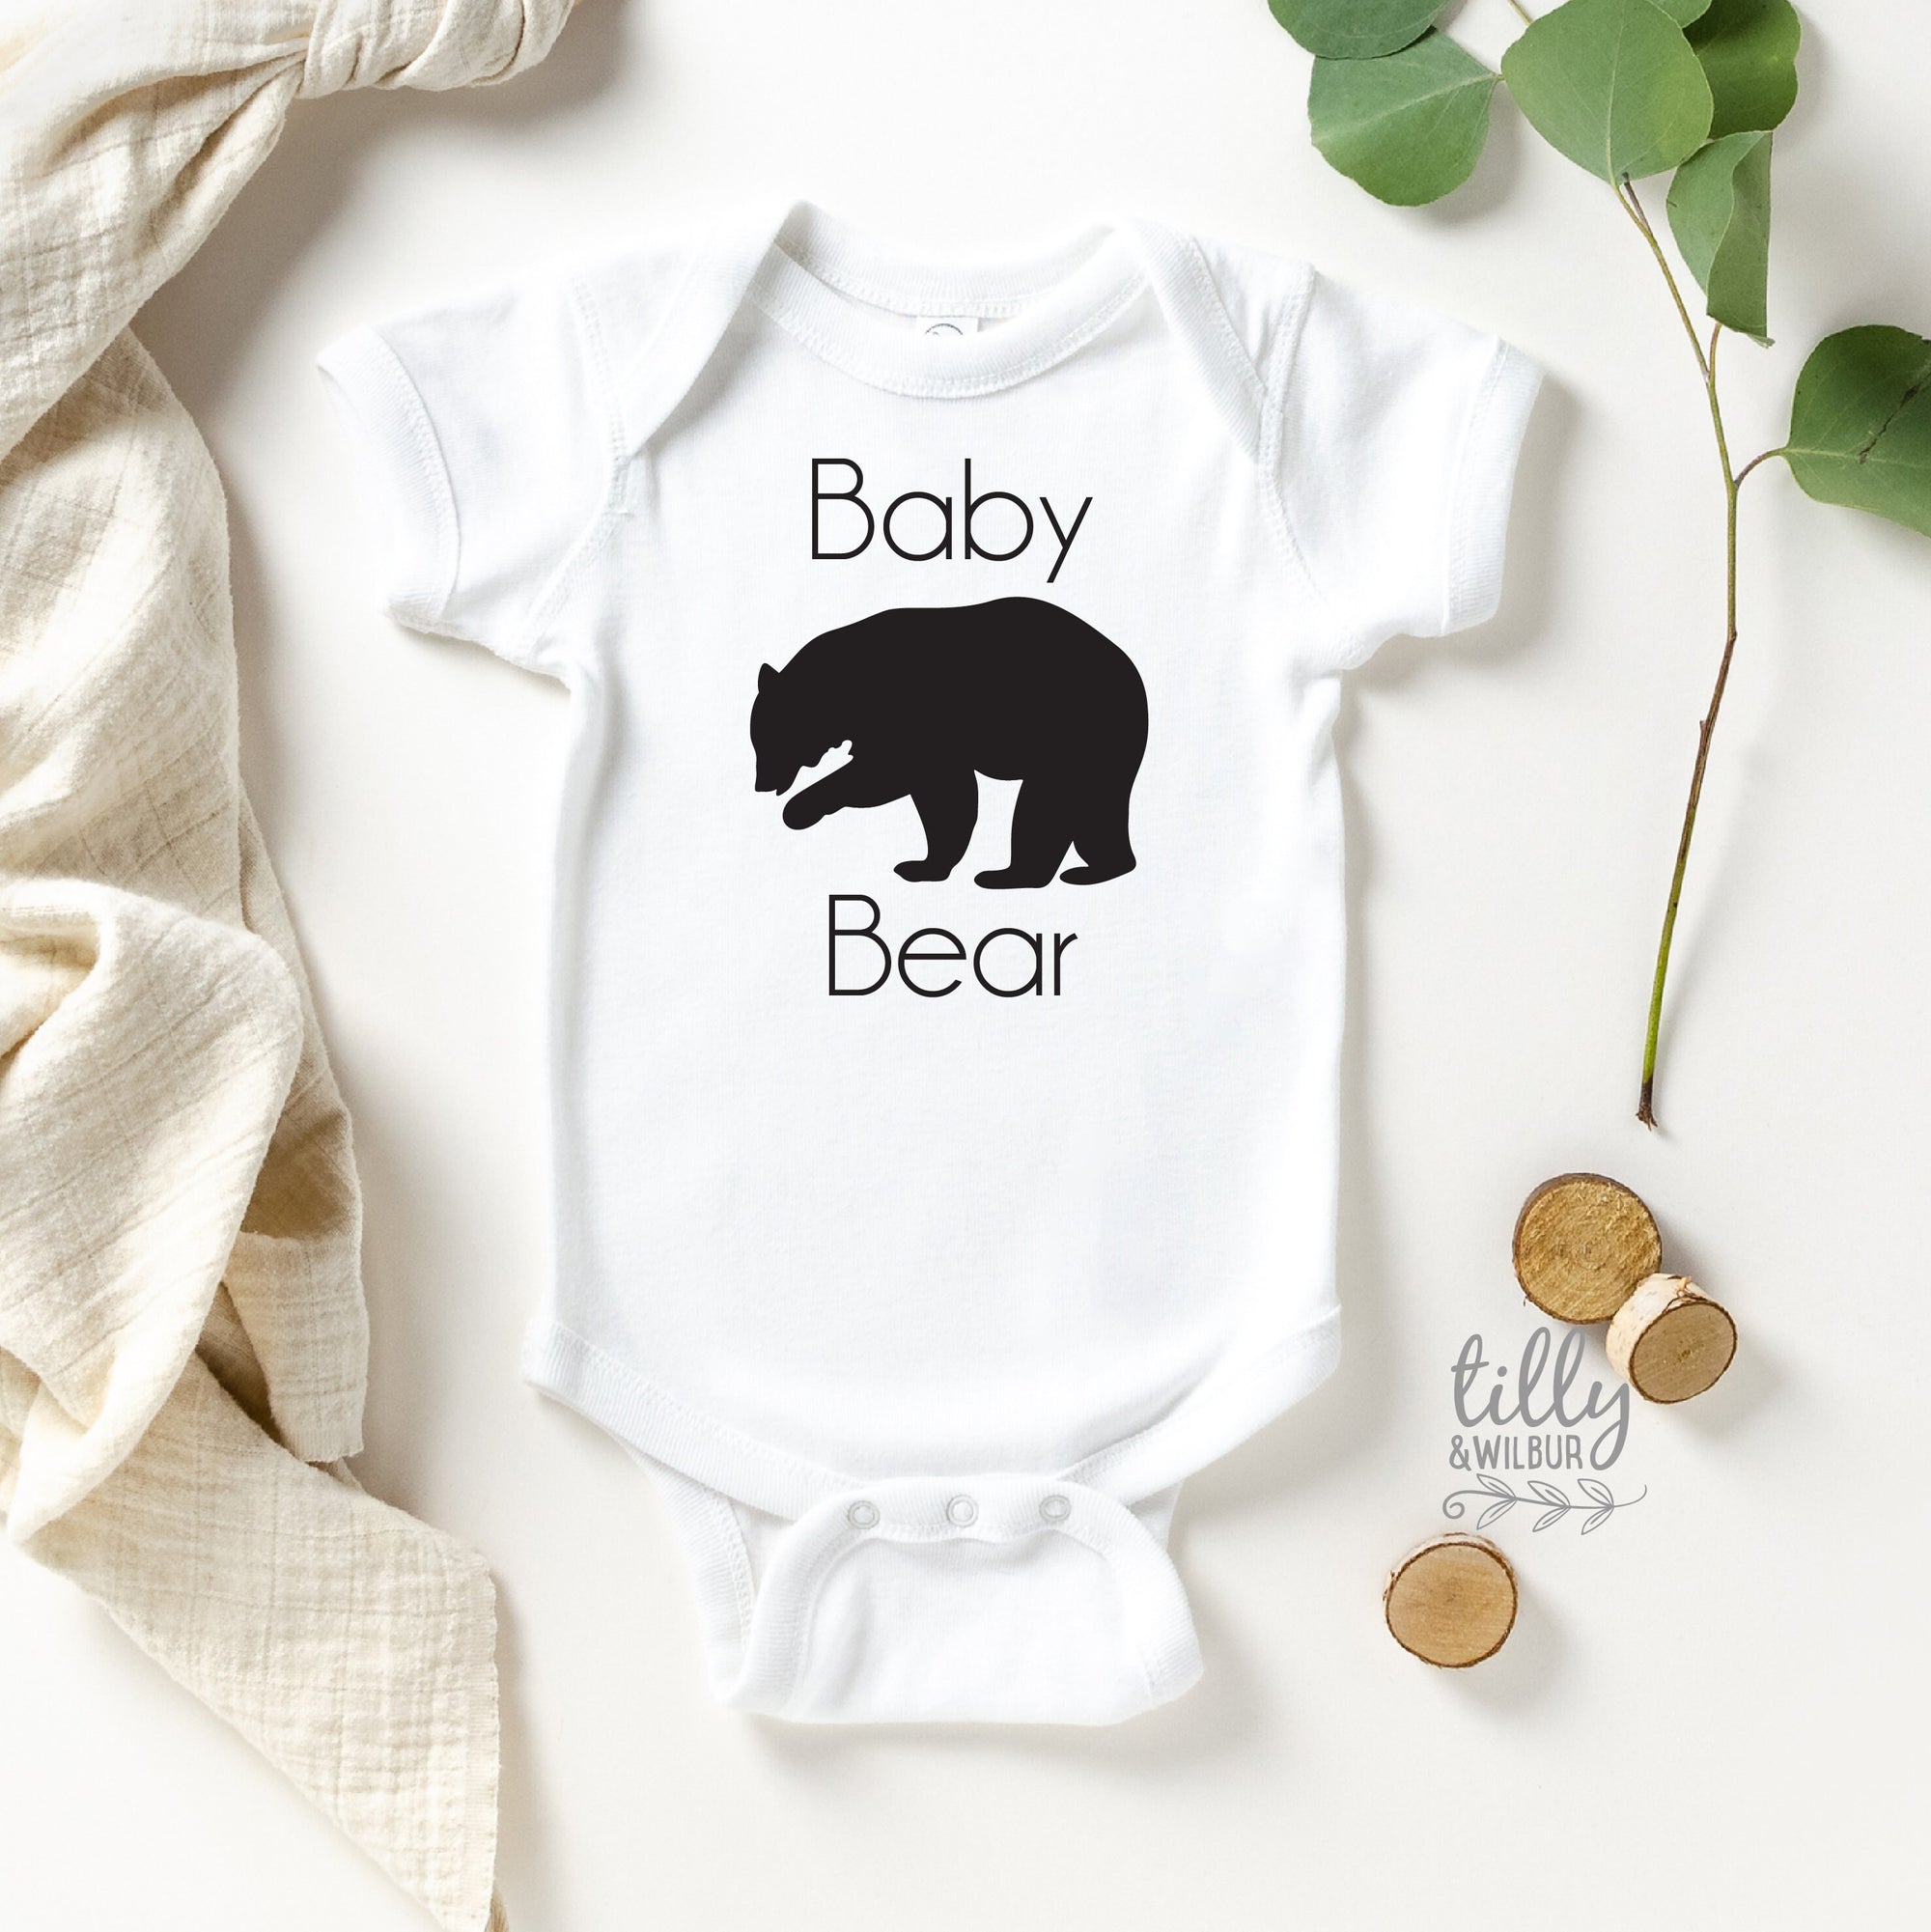 Baby Bear Bodysuit, Add To Matching Set For Growing Bub, Matching Mother's Day Bodysuit, Matching Father's Day Bodysuit, Matching Family